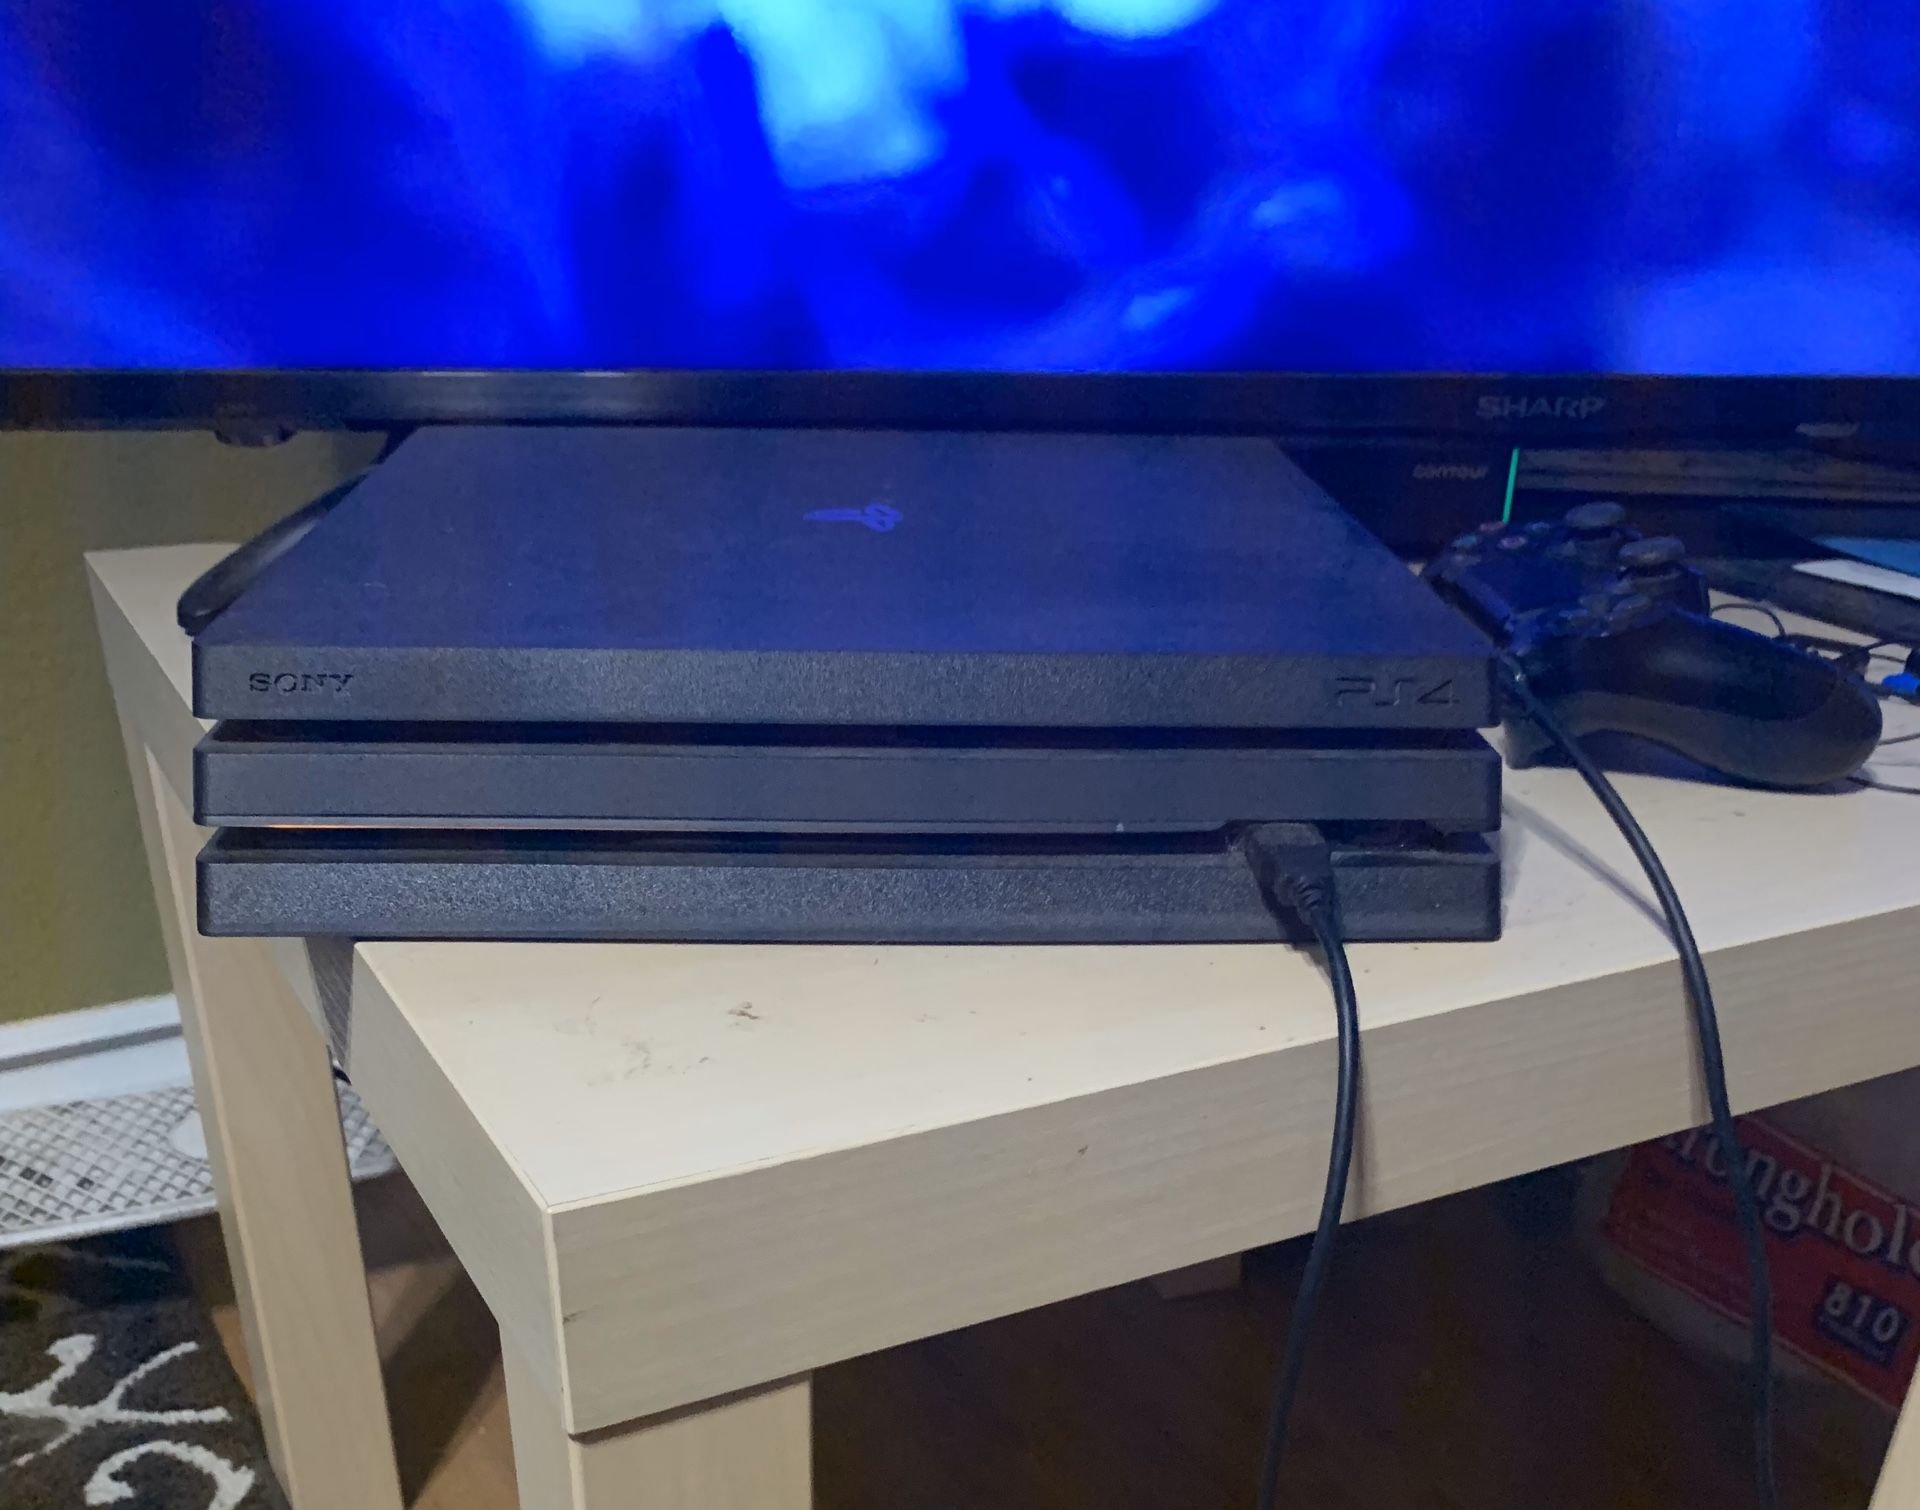 PS4 Pro w/ all accessories + RDR2, Madden 20, NBA 2K20